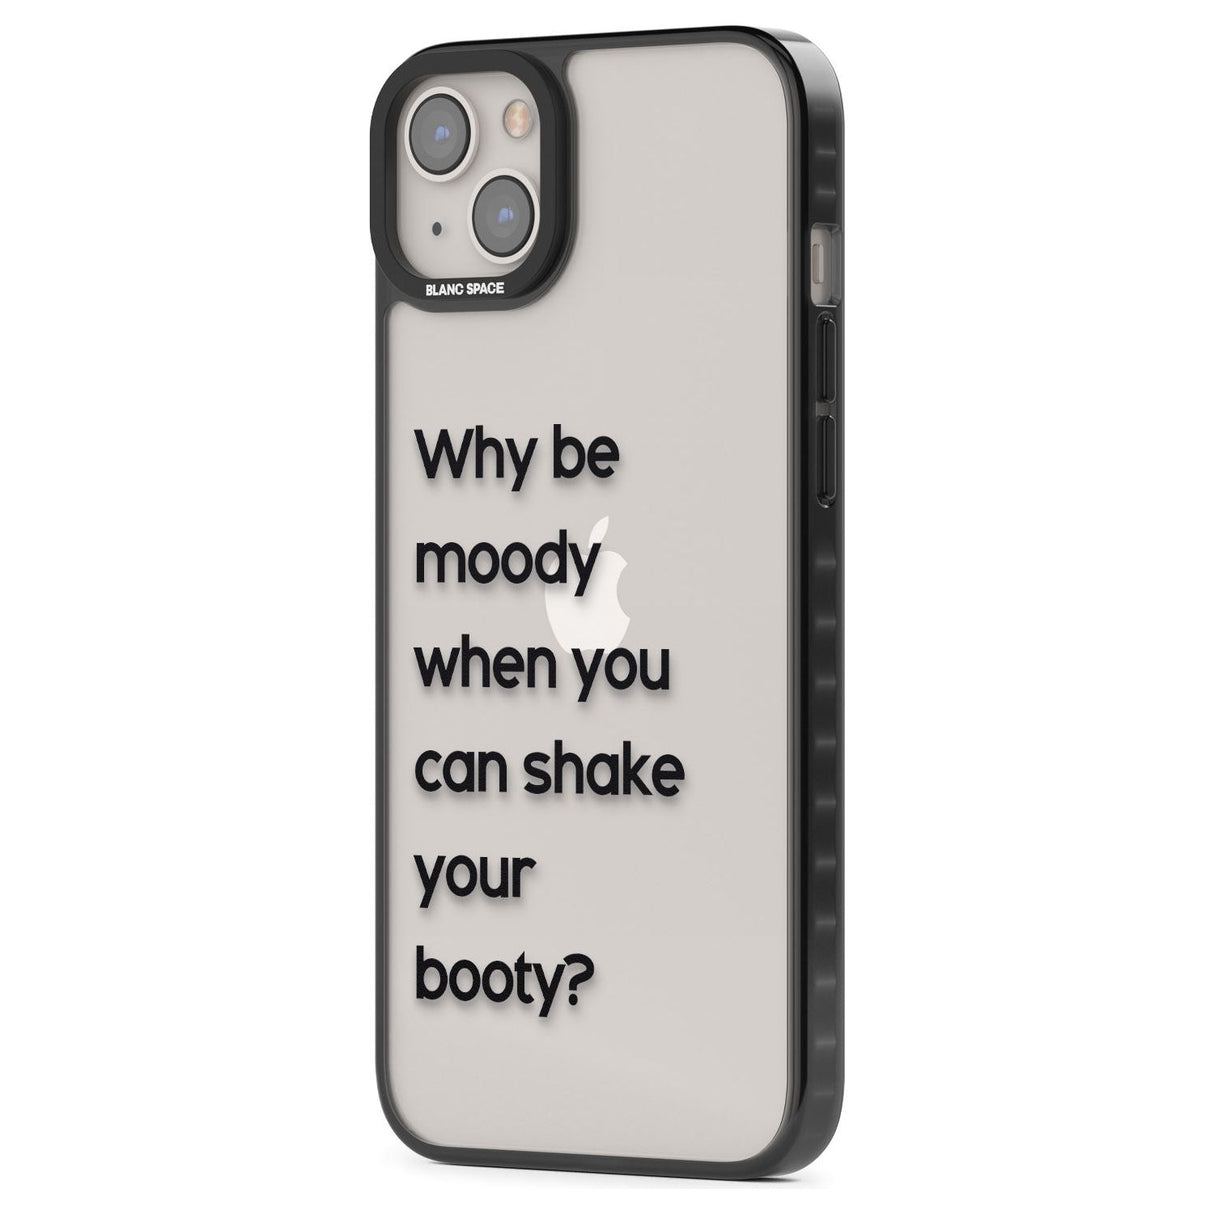 Why be moody?